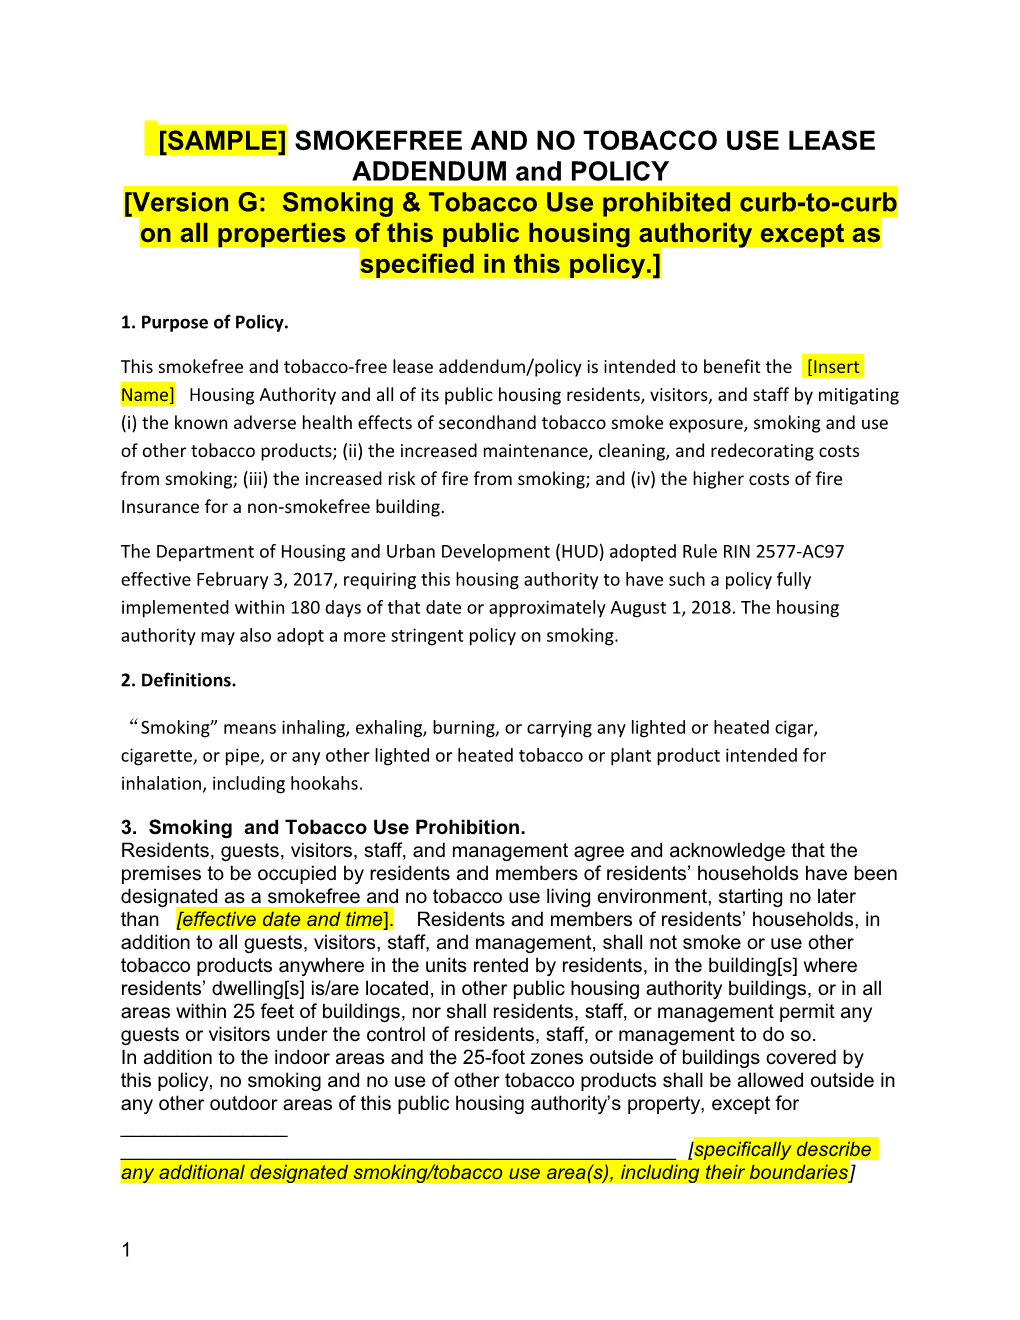 SAMPLE SMOKEFREE and NO TOBACCO USE LEASE ADDENDUM and POLICY